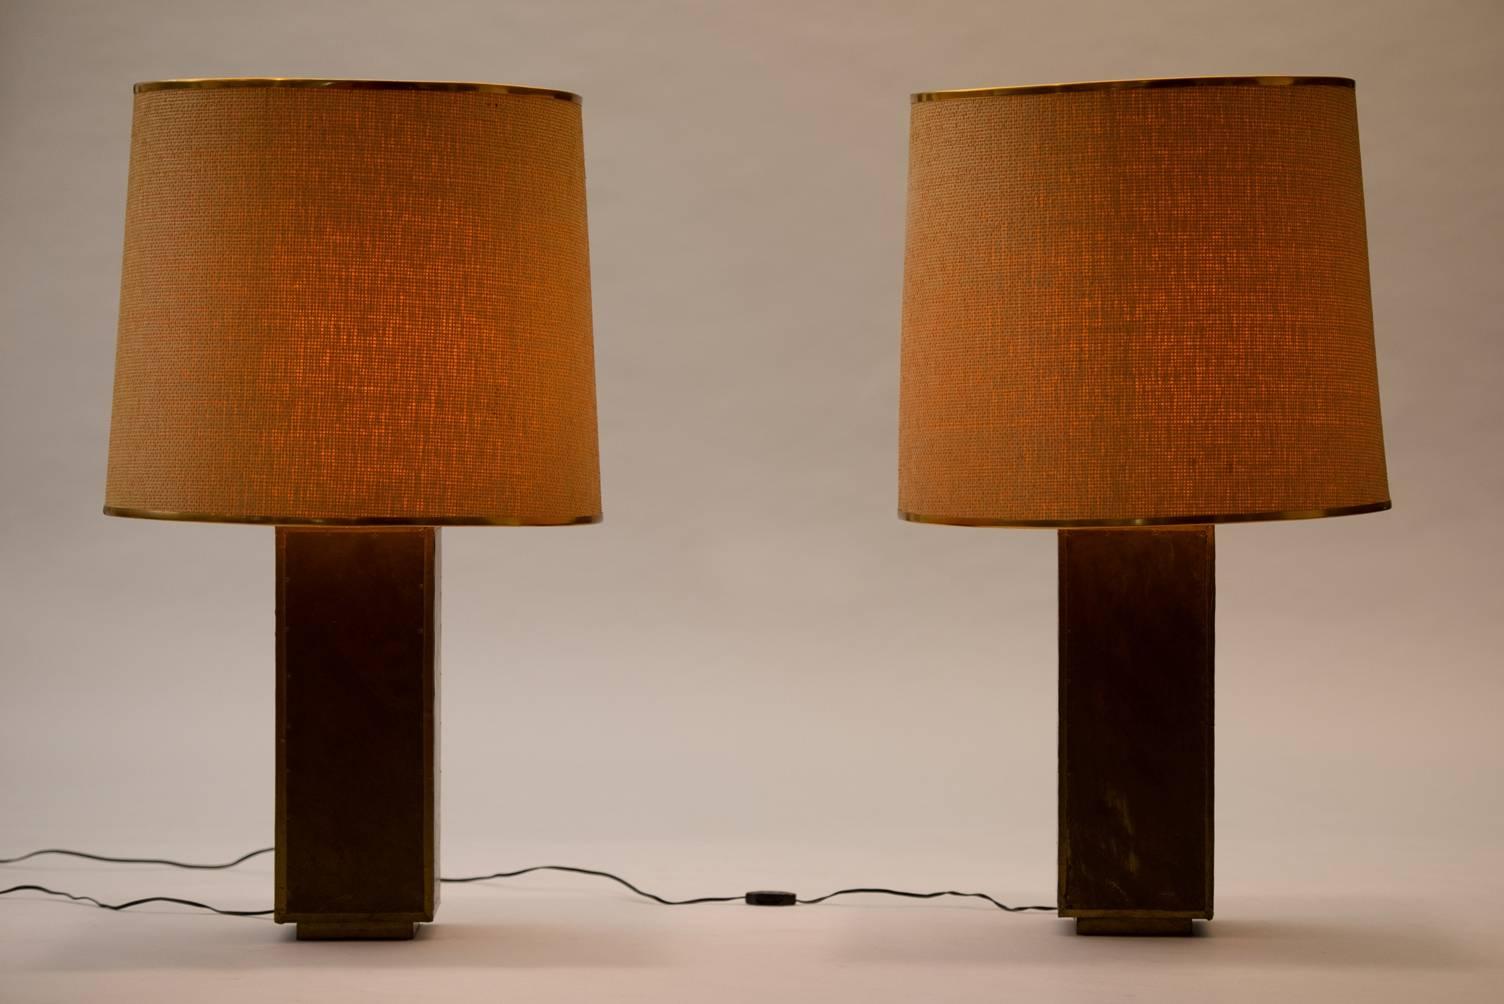 A pair of large brass table lamps, rattan shades with brass frames.
Signed R. Dubarry.